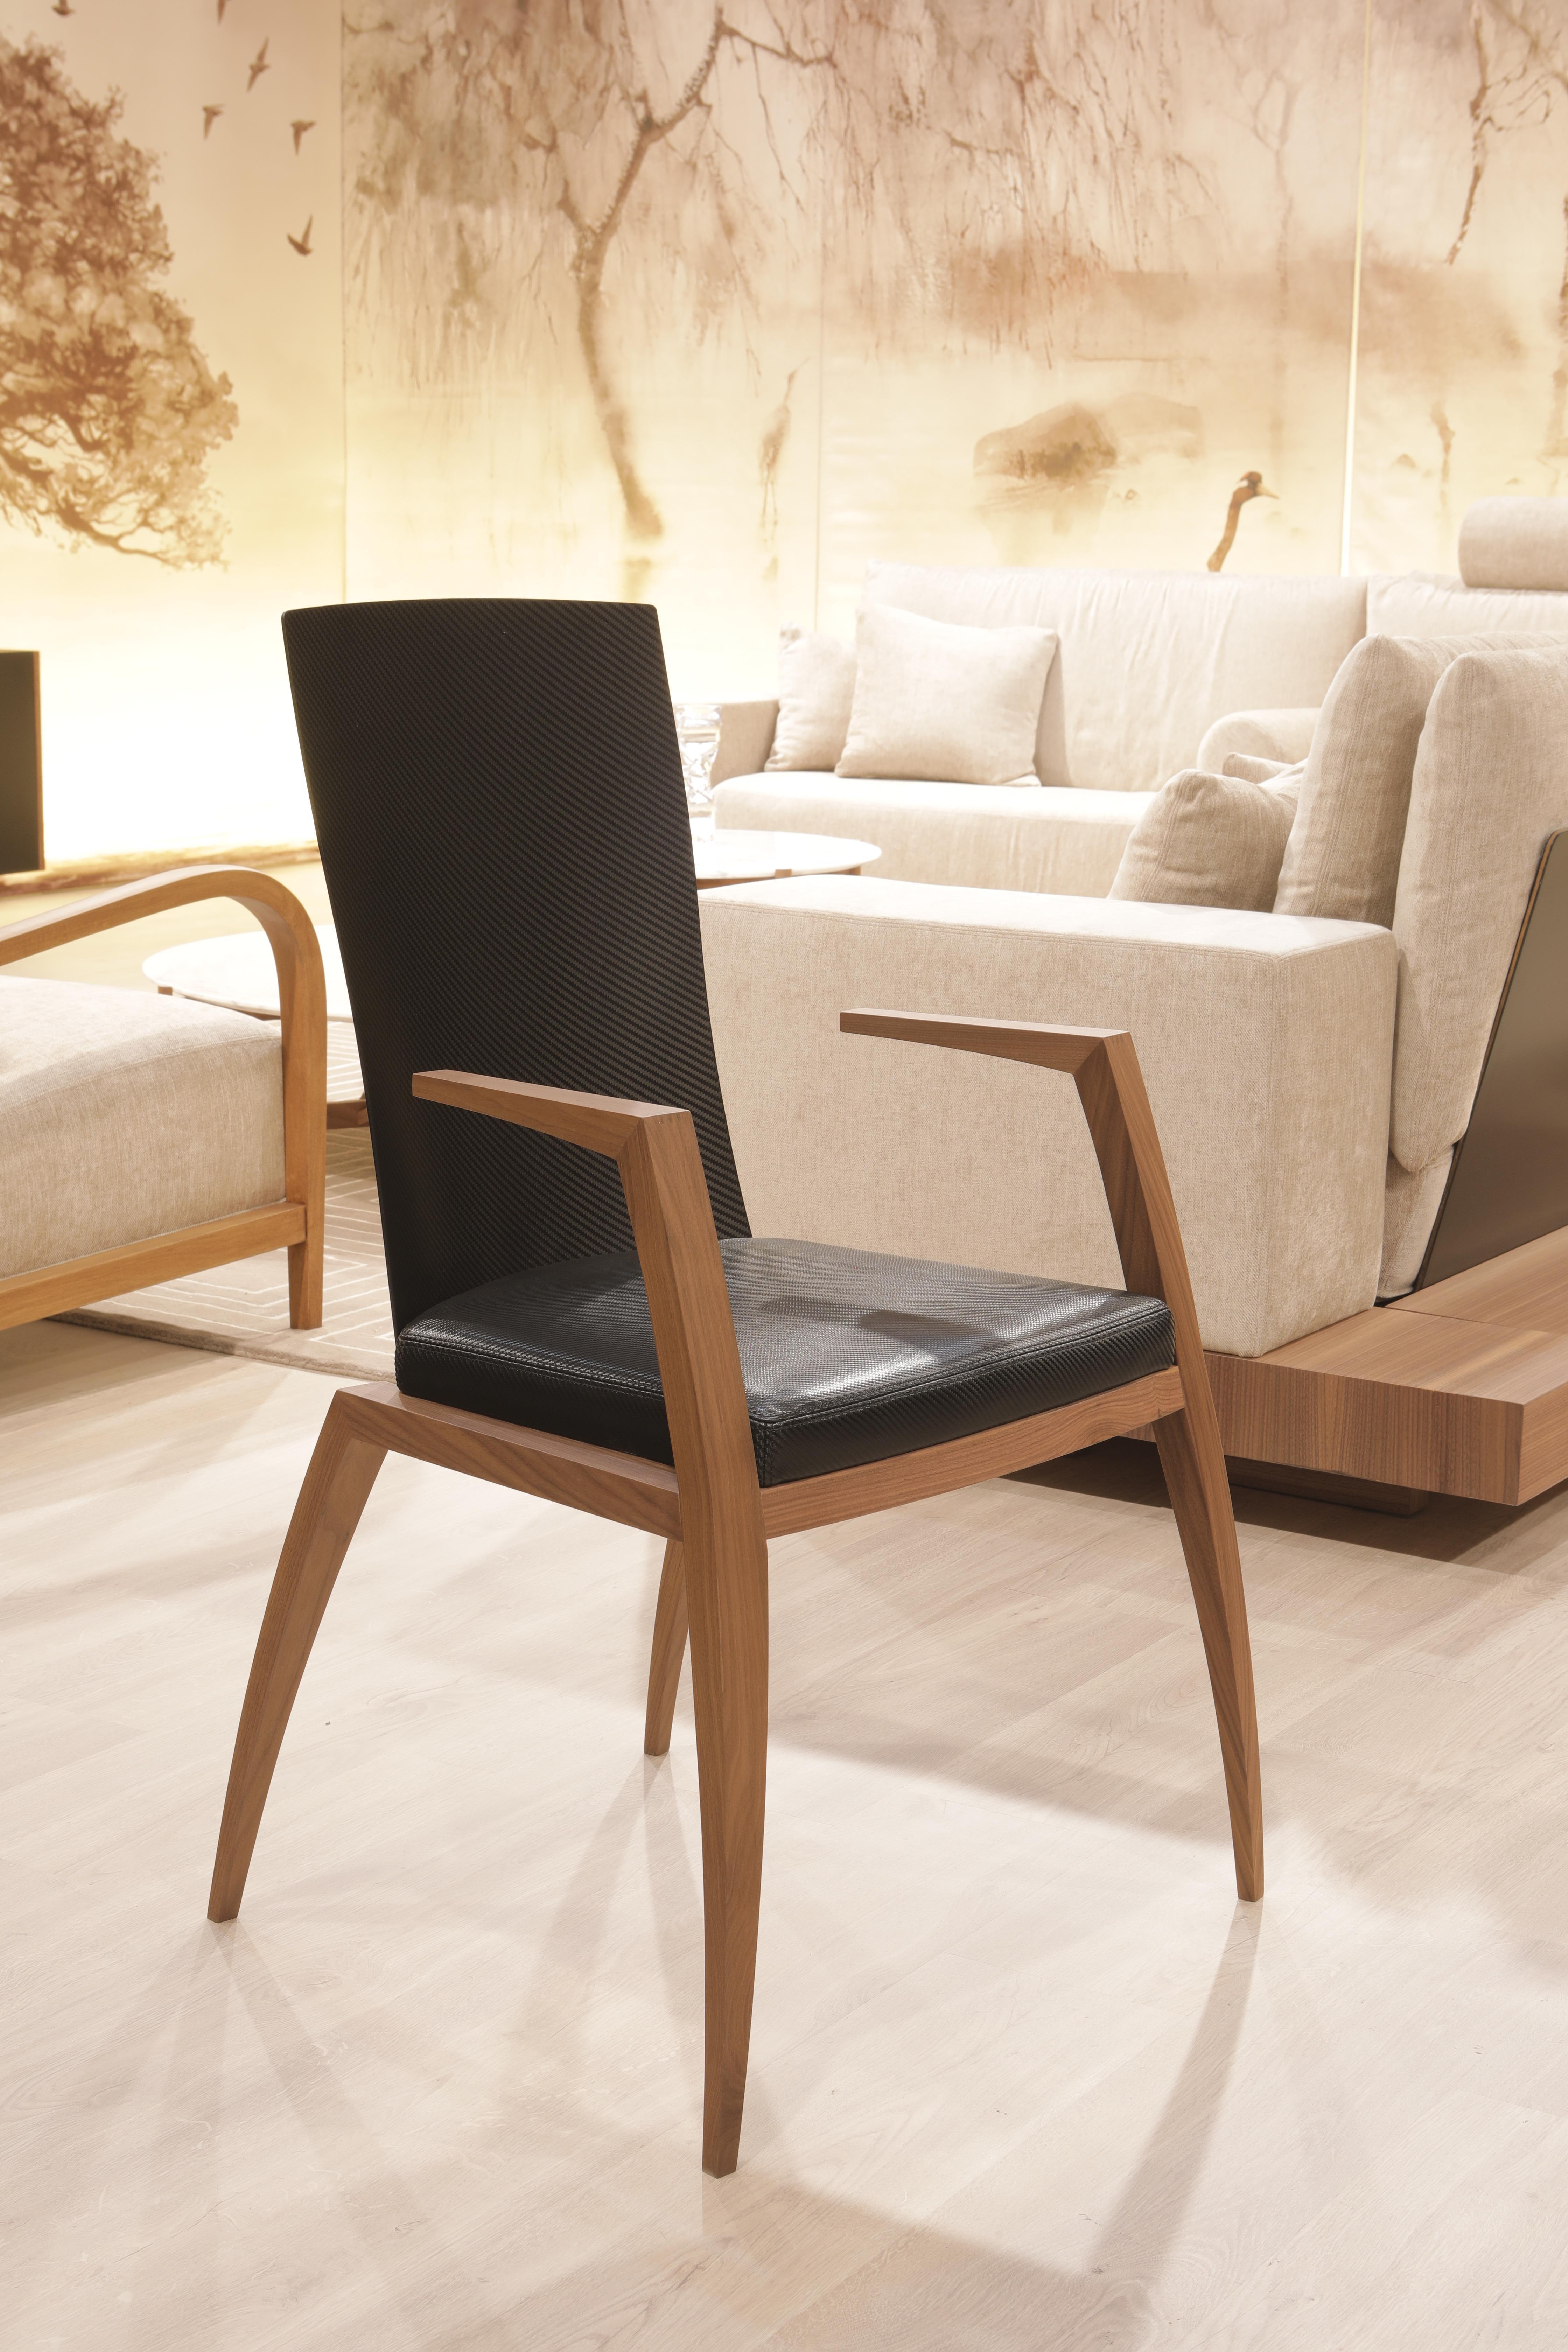 Modern Design Chair with Armrests, Made in Canaletto Walnut and Carbon Fiber For Sale 2